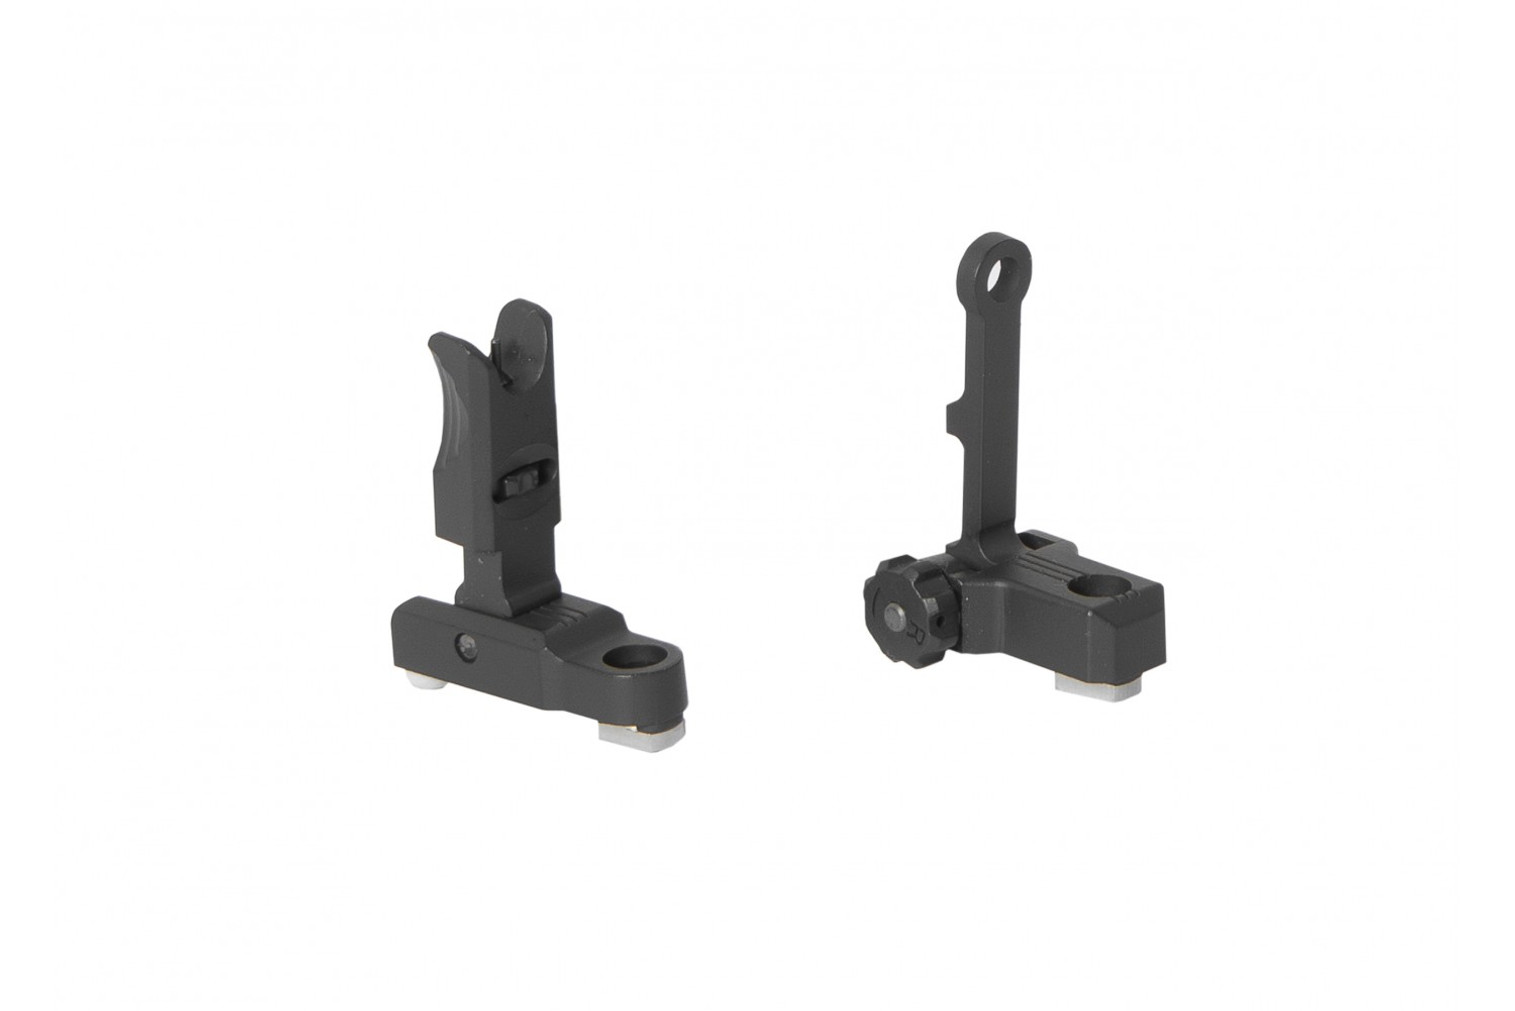 Front & Rear Sight Set for M-Lok System